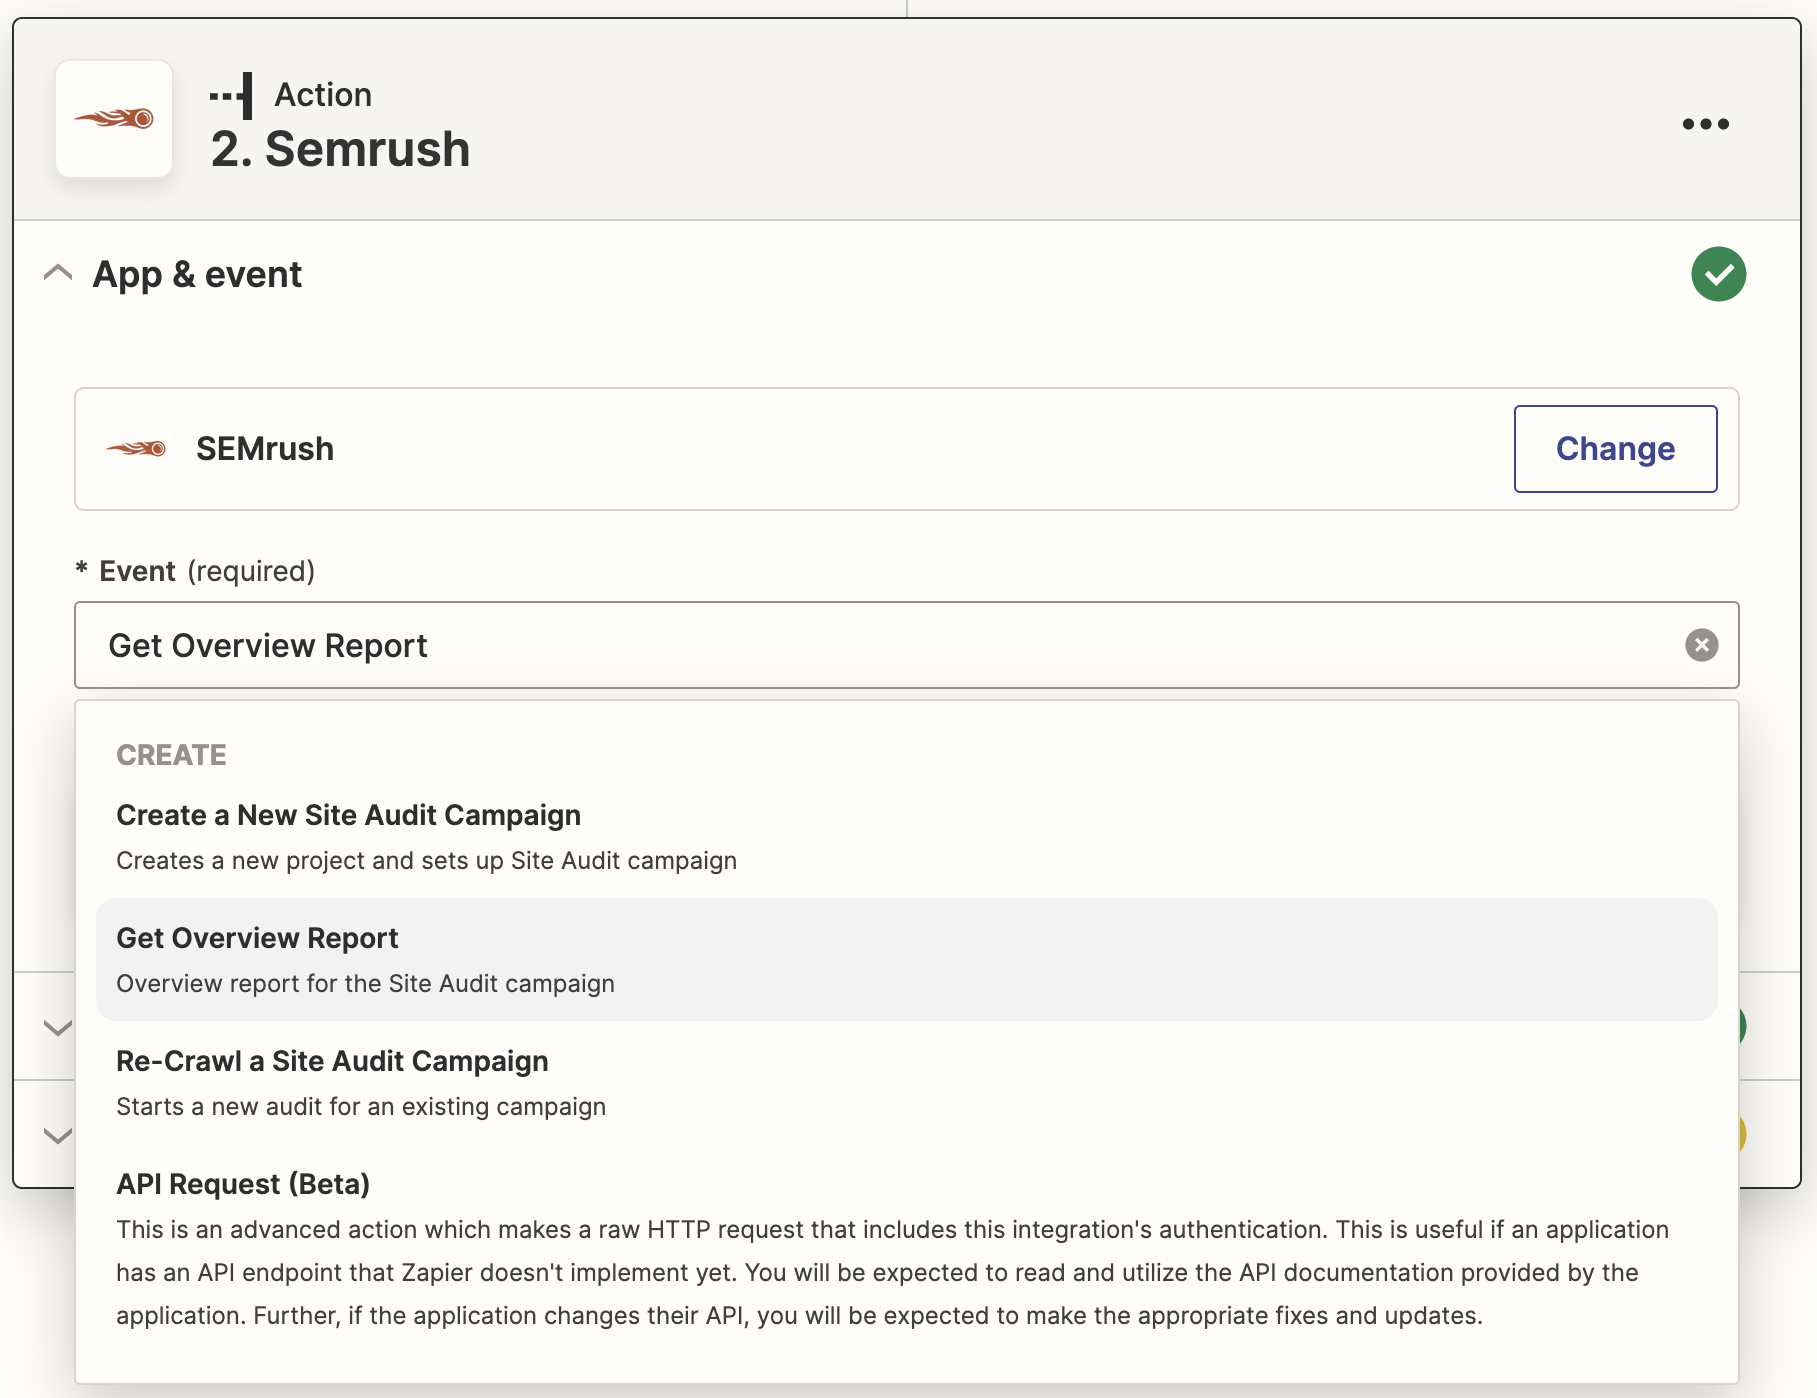 App & event tab in Zapier, showing available actions for an example event 'Get Overview Report'.